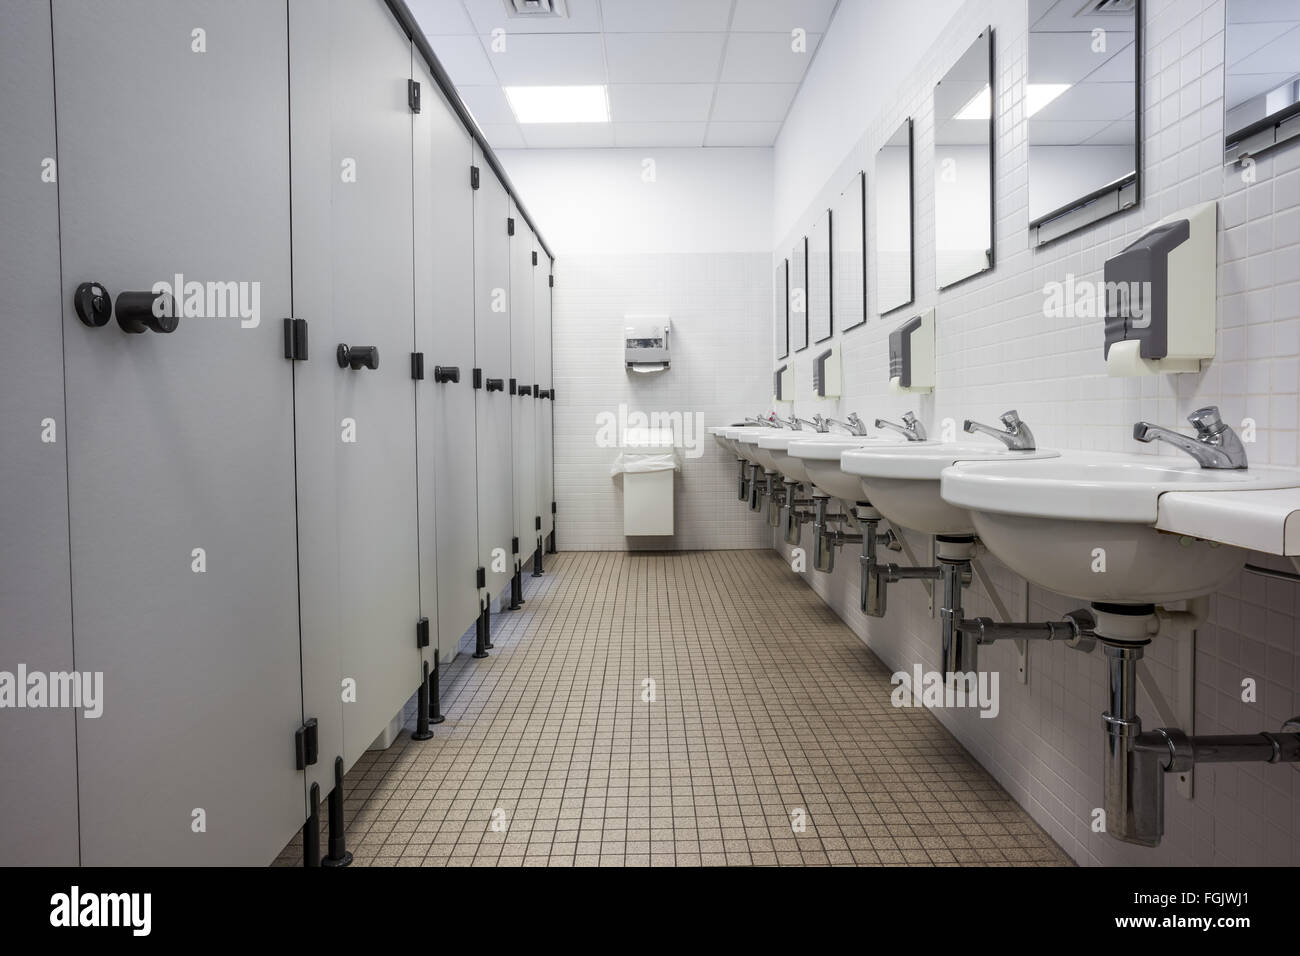 In an public building are womans toilets whit sinks Stock Photo